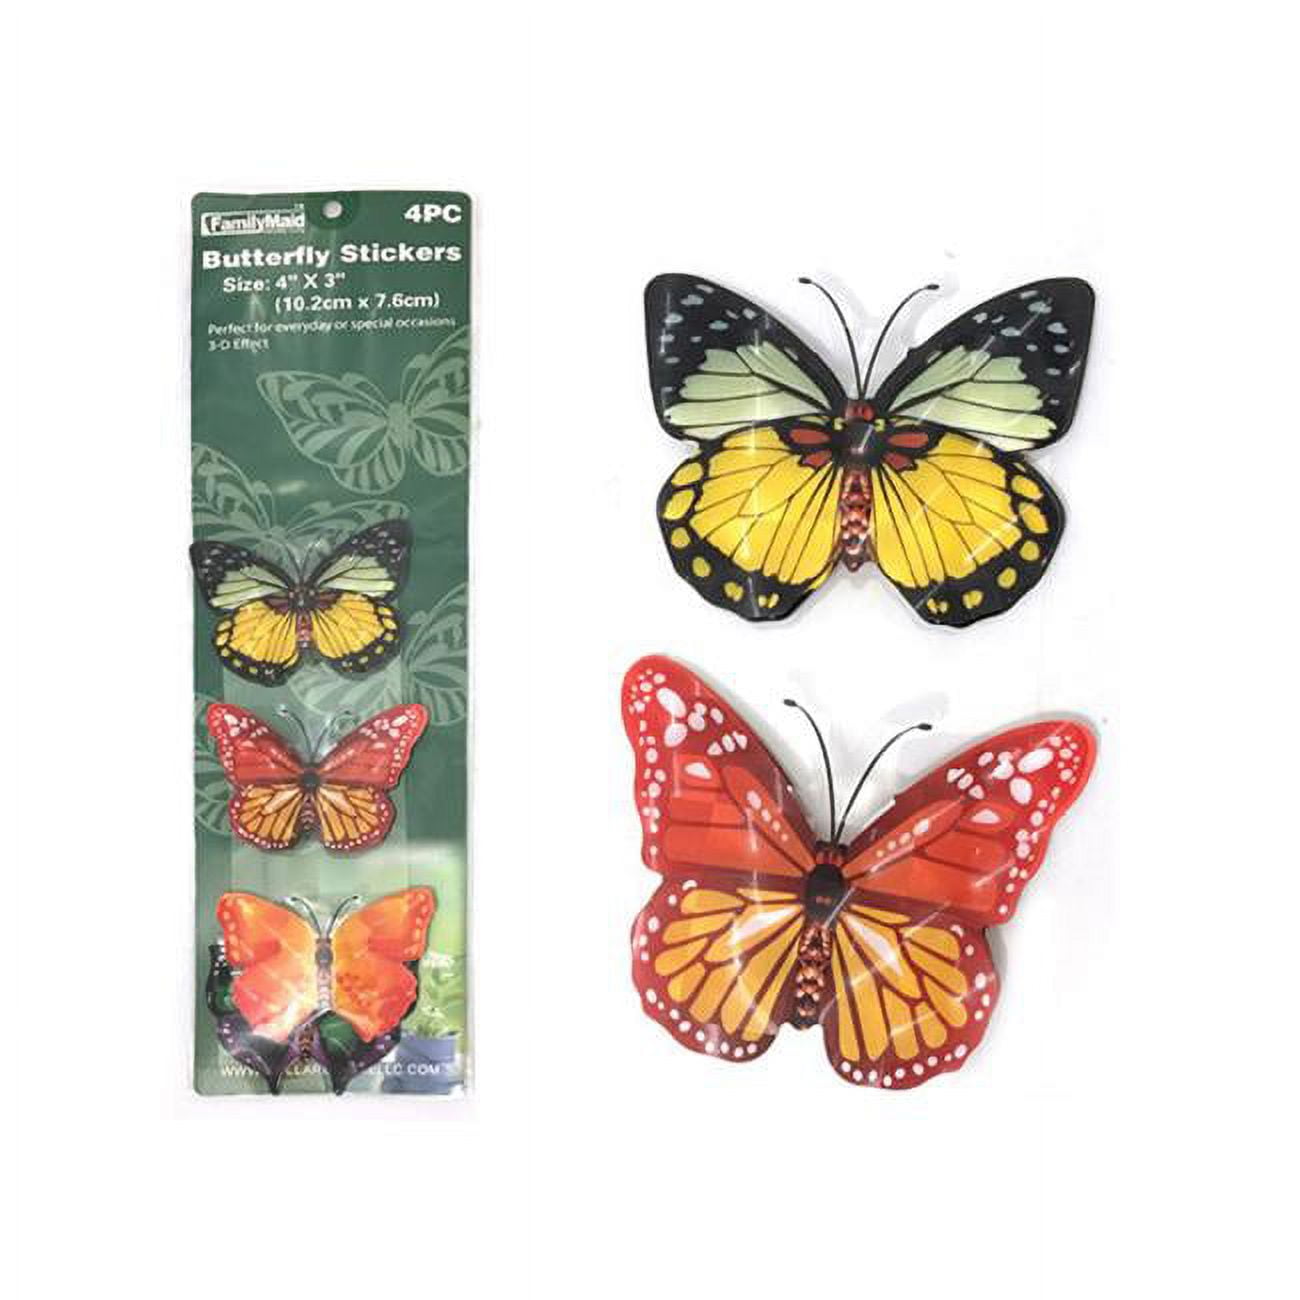 Picture of Family Maid 27188 4 x 3 in. Butterfly Stickers - 4 Piece - Pack of 72